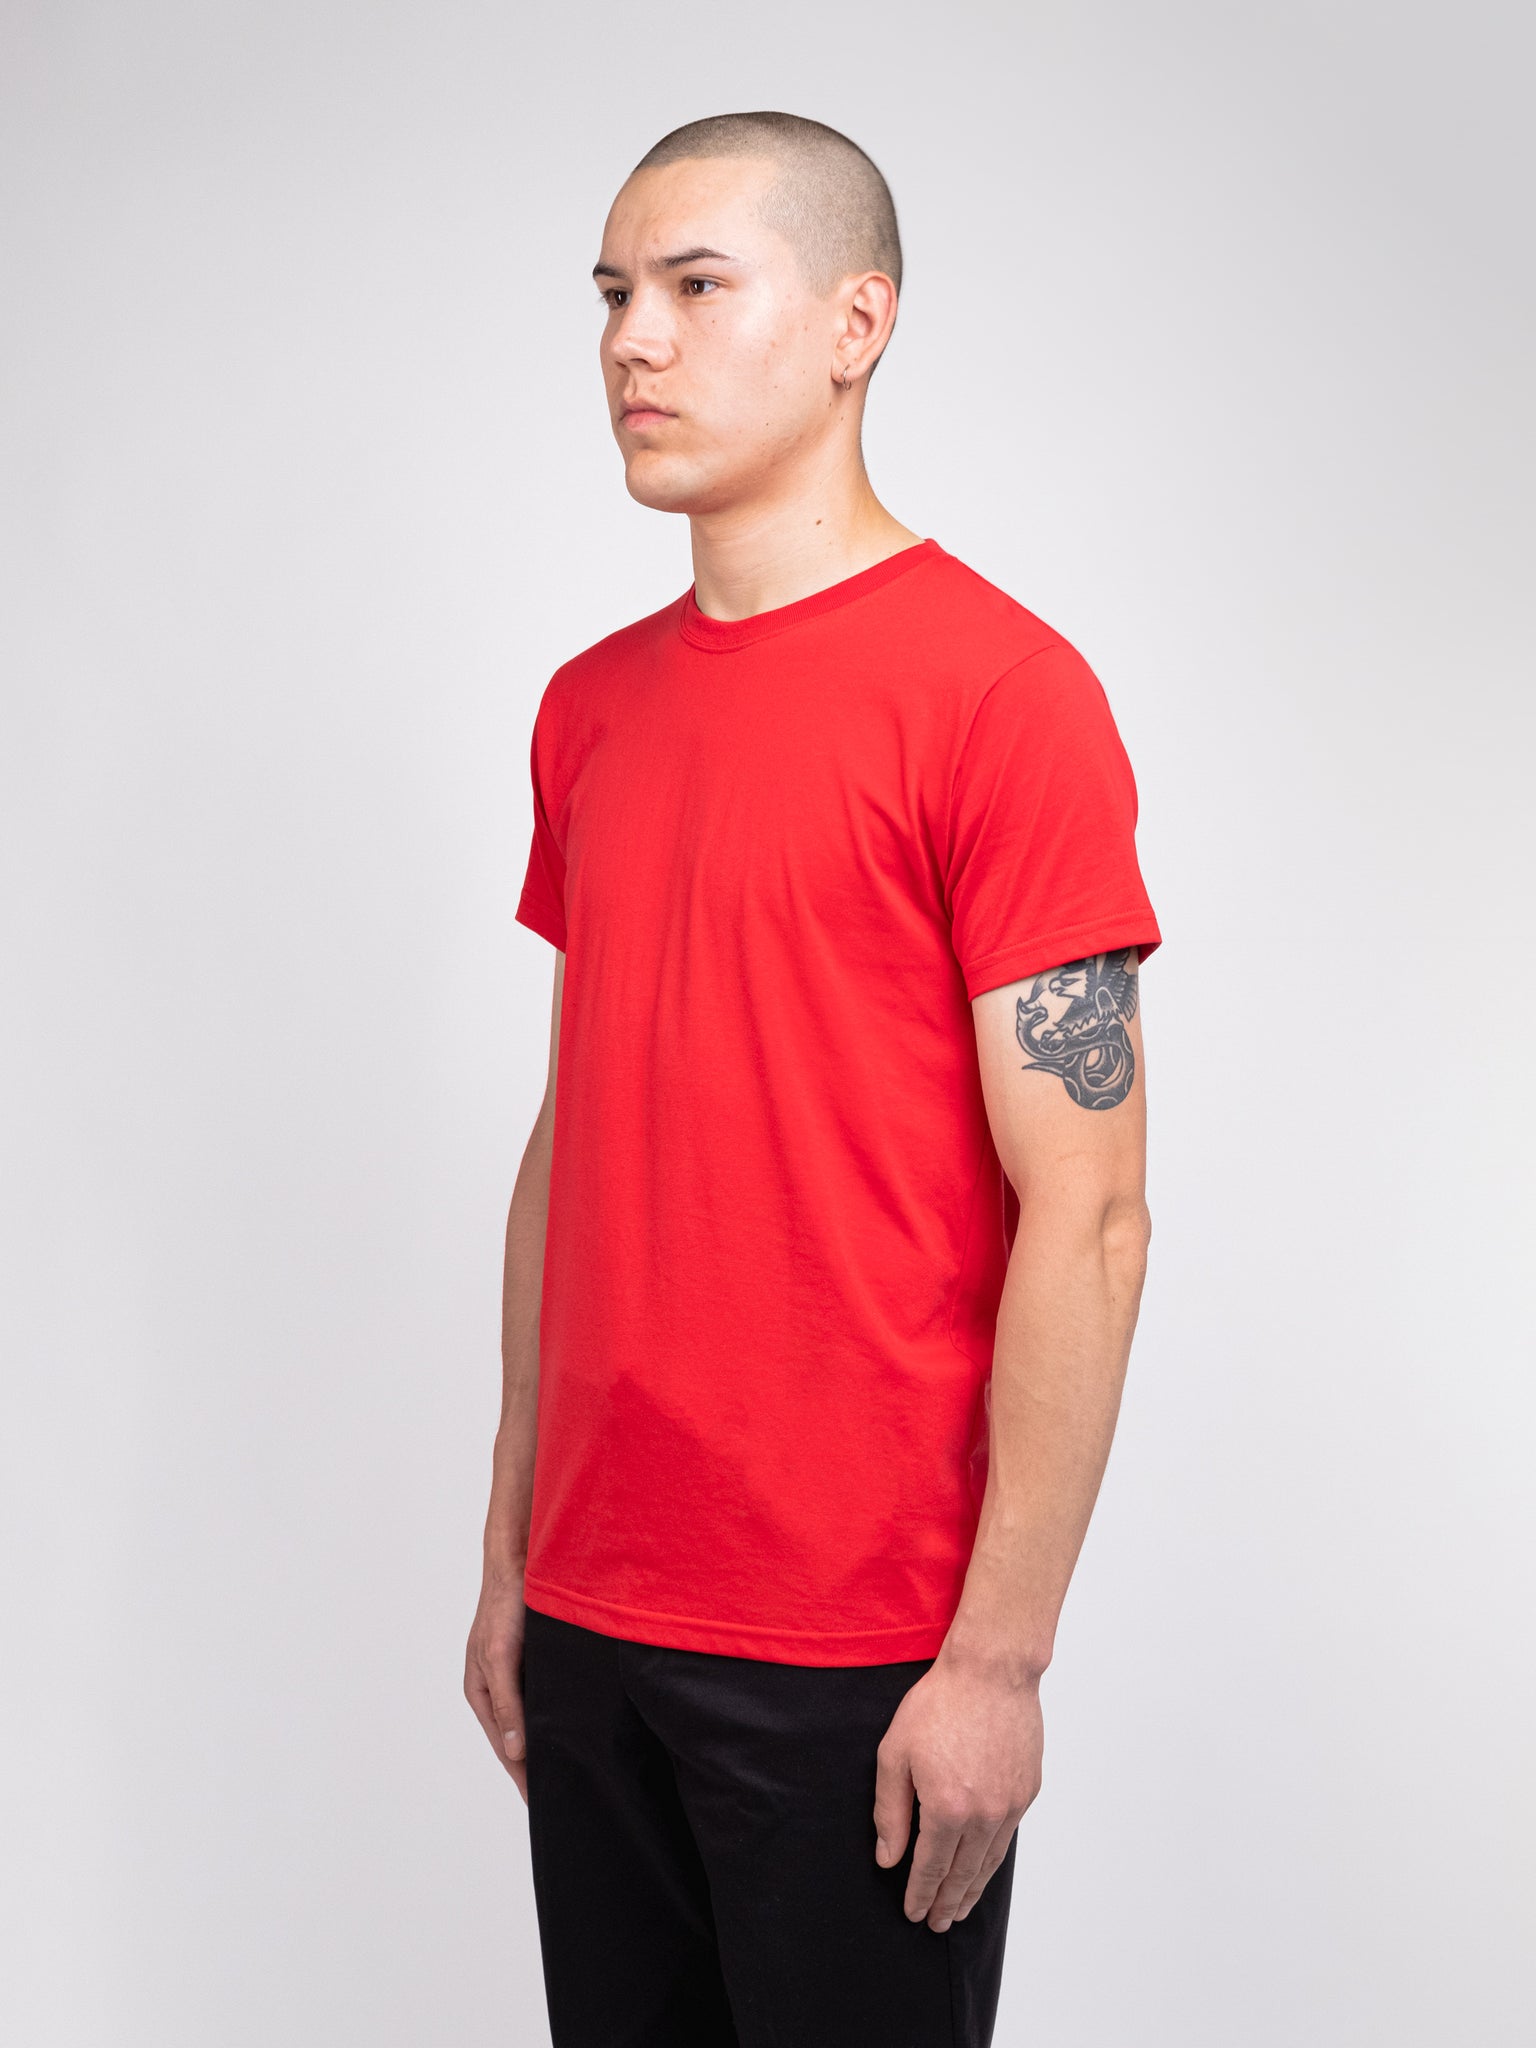 - T-Shirt ADAPTURE v2 – Whirl Fire Fit Slim